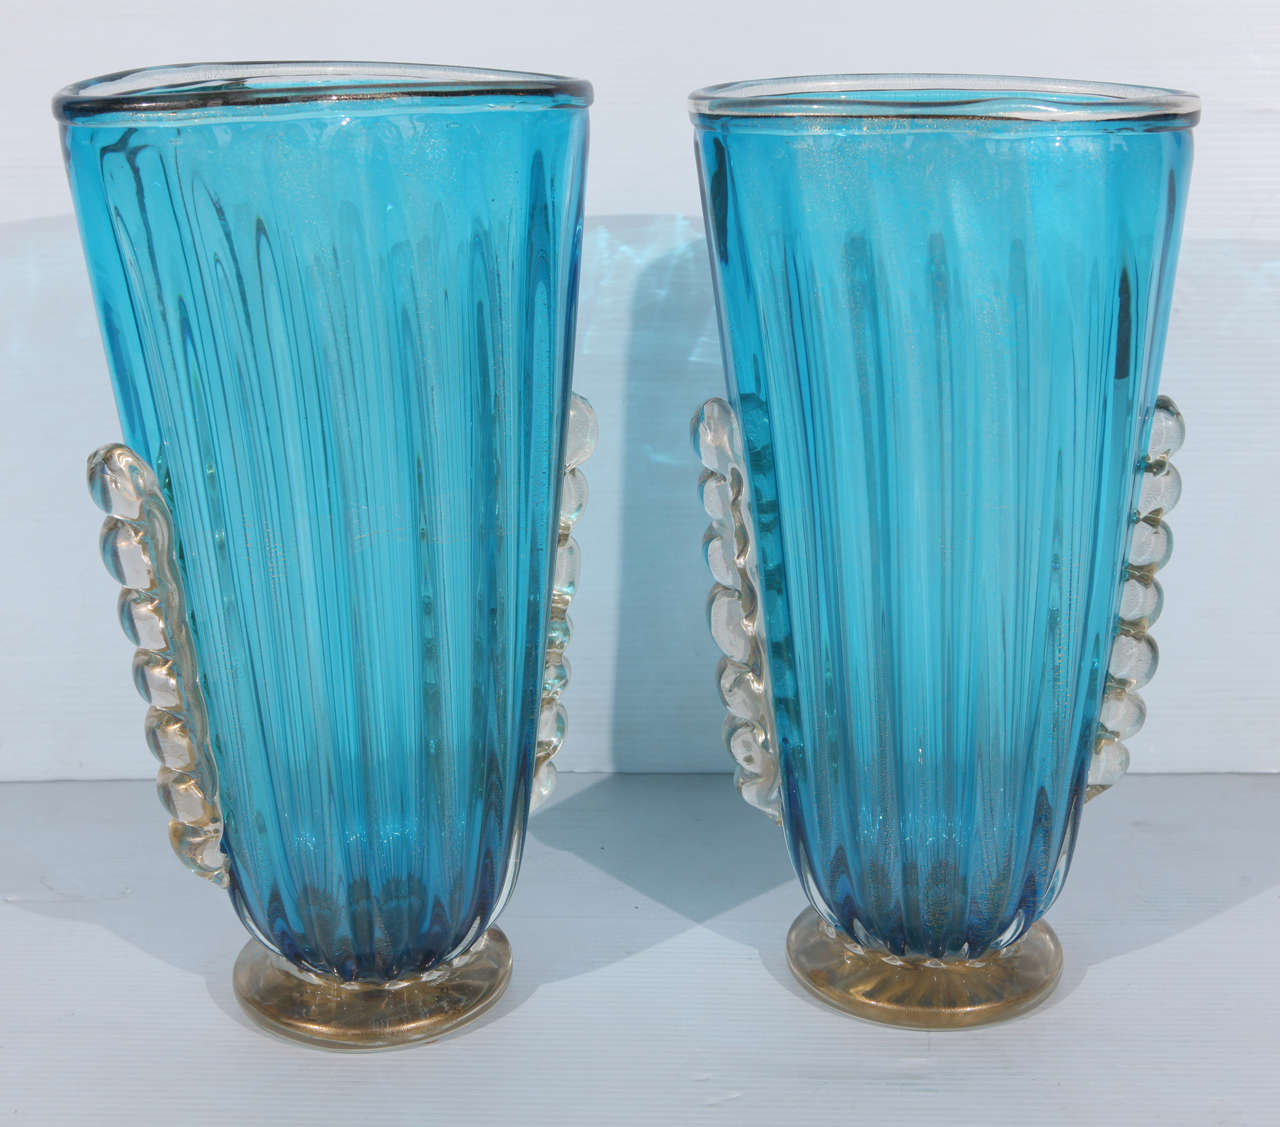 Beautiful Pair of Aquamarine Murano Vases with infused  gold  flecks
Signed Alberto Dona

Alberto Donà was born in Italy in 1944. Alberto_Donà
He began working in the glass field at the age of 13. He worked with many masters and had the